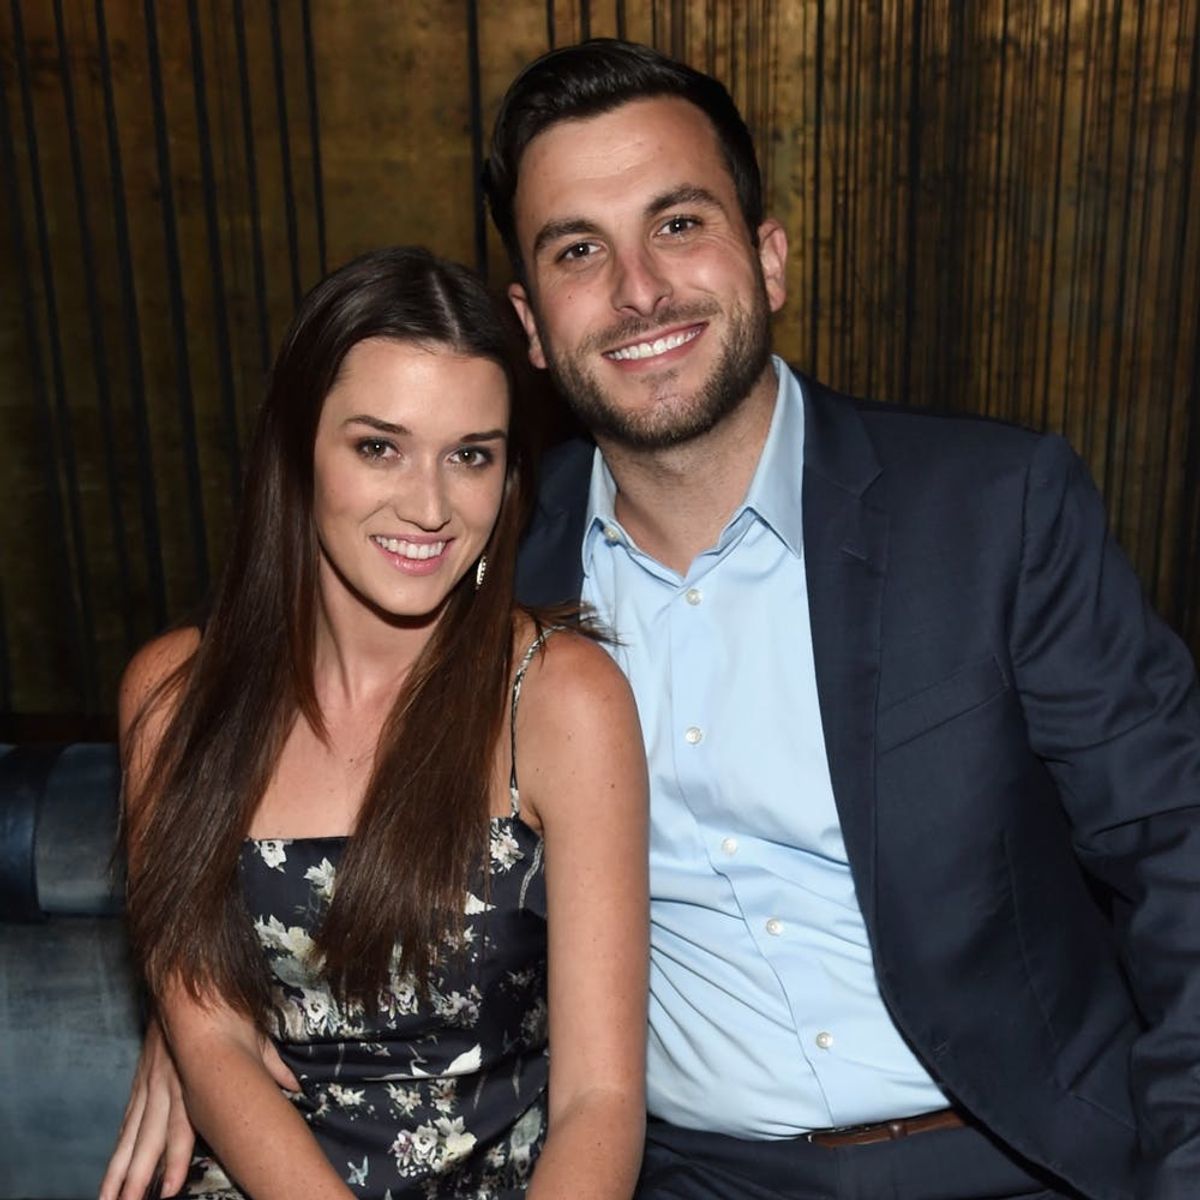 It’s a Girl! Jade Roper Gives Birth to First Child With Tanner Tolbert